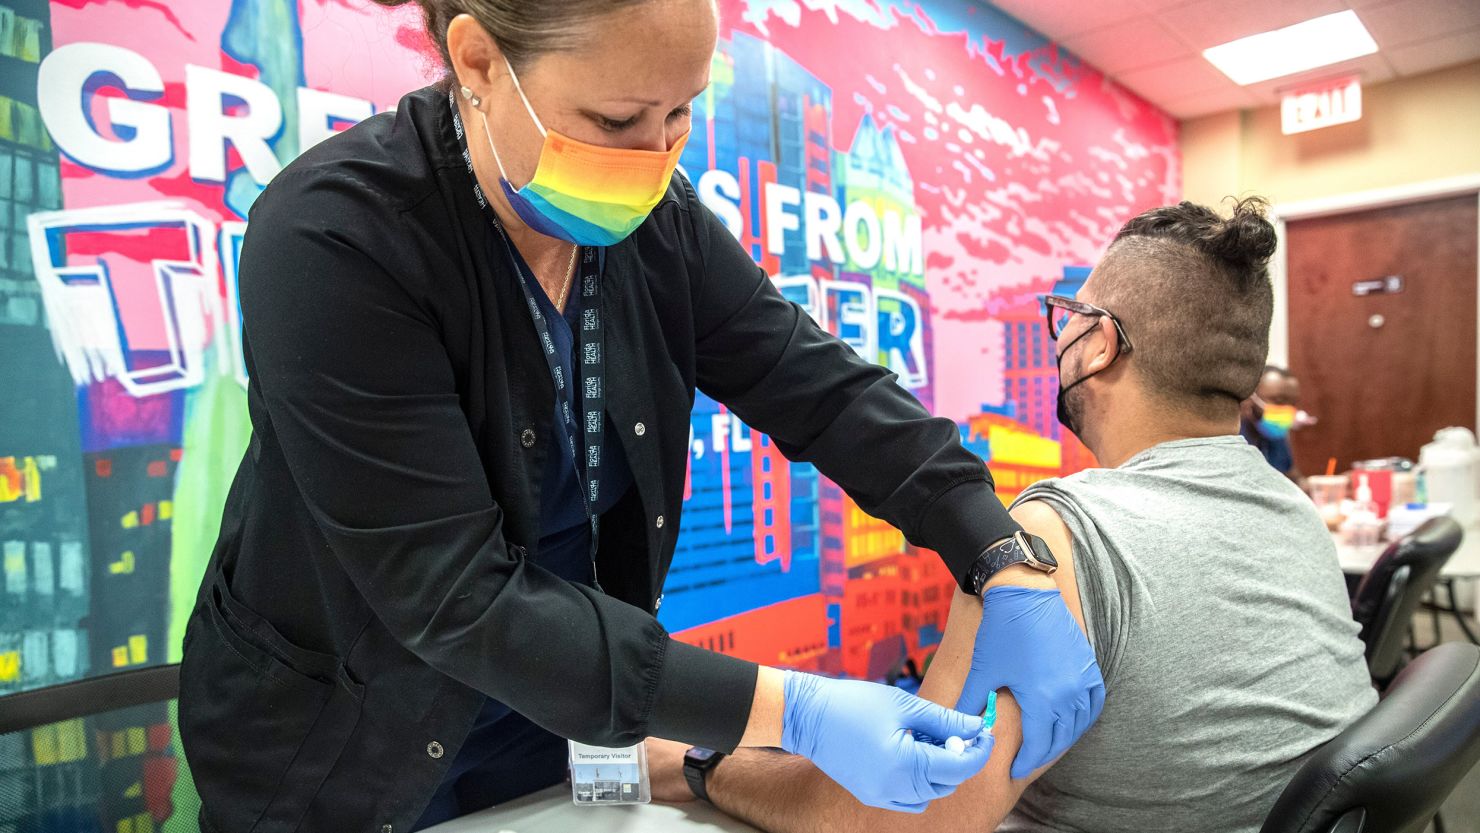 Kerri Phithibeault gives Danny Garcia a mpox vaccination in Orlando, Florida, in August.